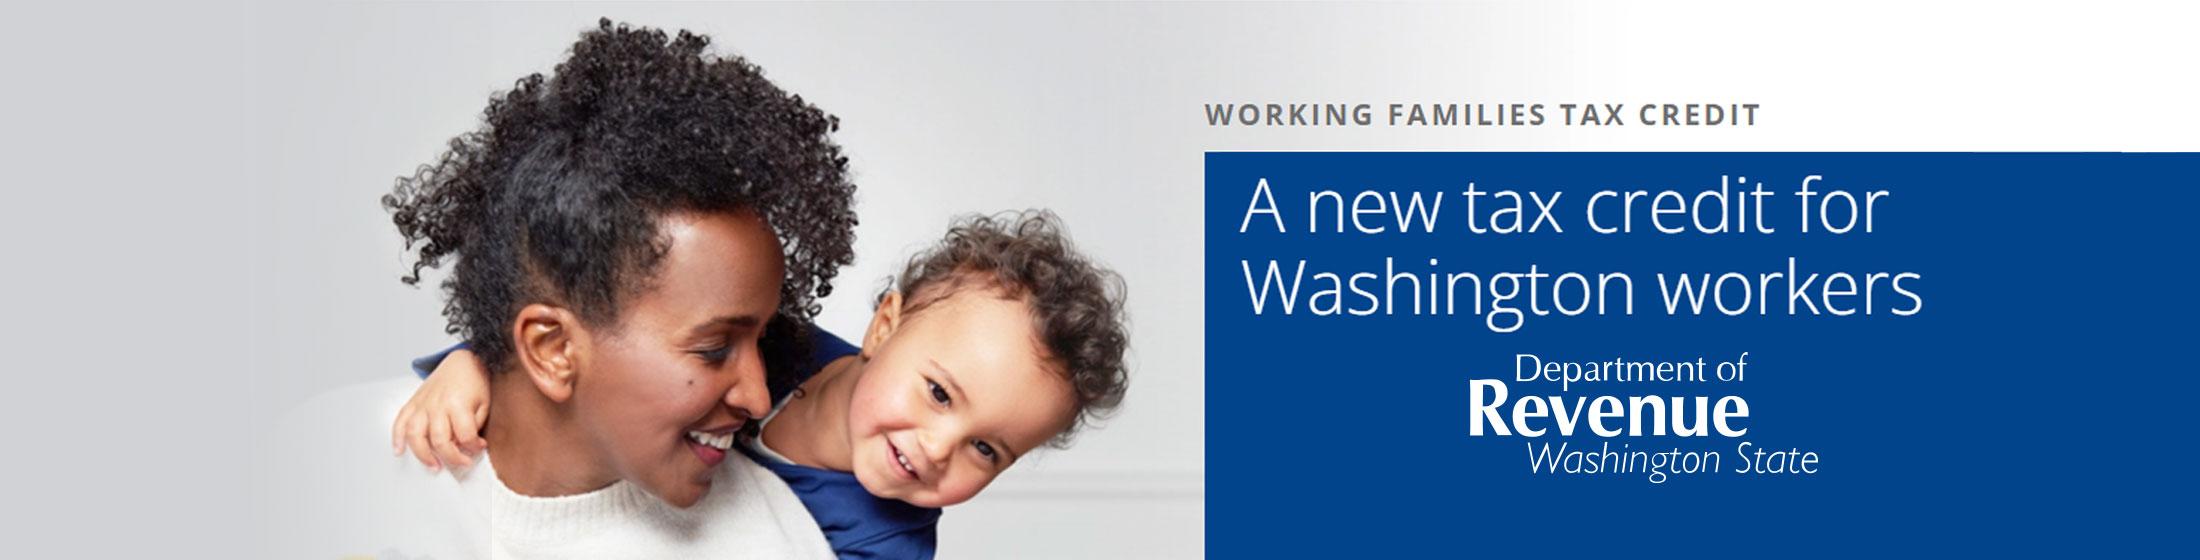 Working Families Tax Credit - A new tax credit for Washington workers - DOR